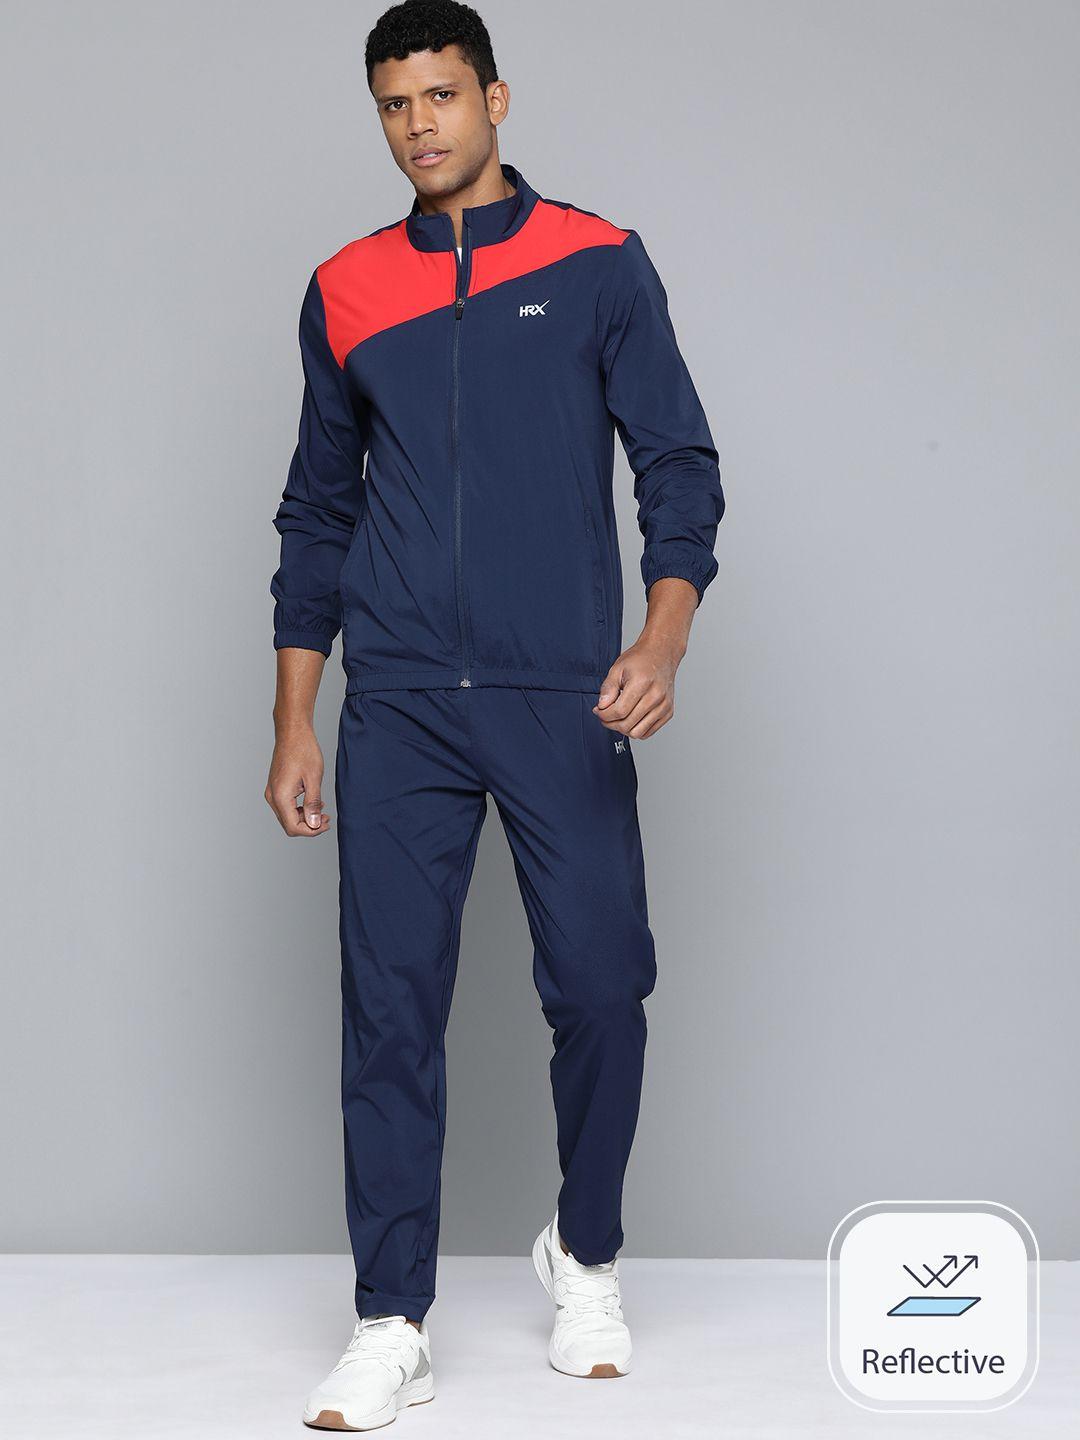 hrx by hrithik roshan men rapid-dry colorblocked running tracksuits